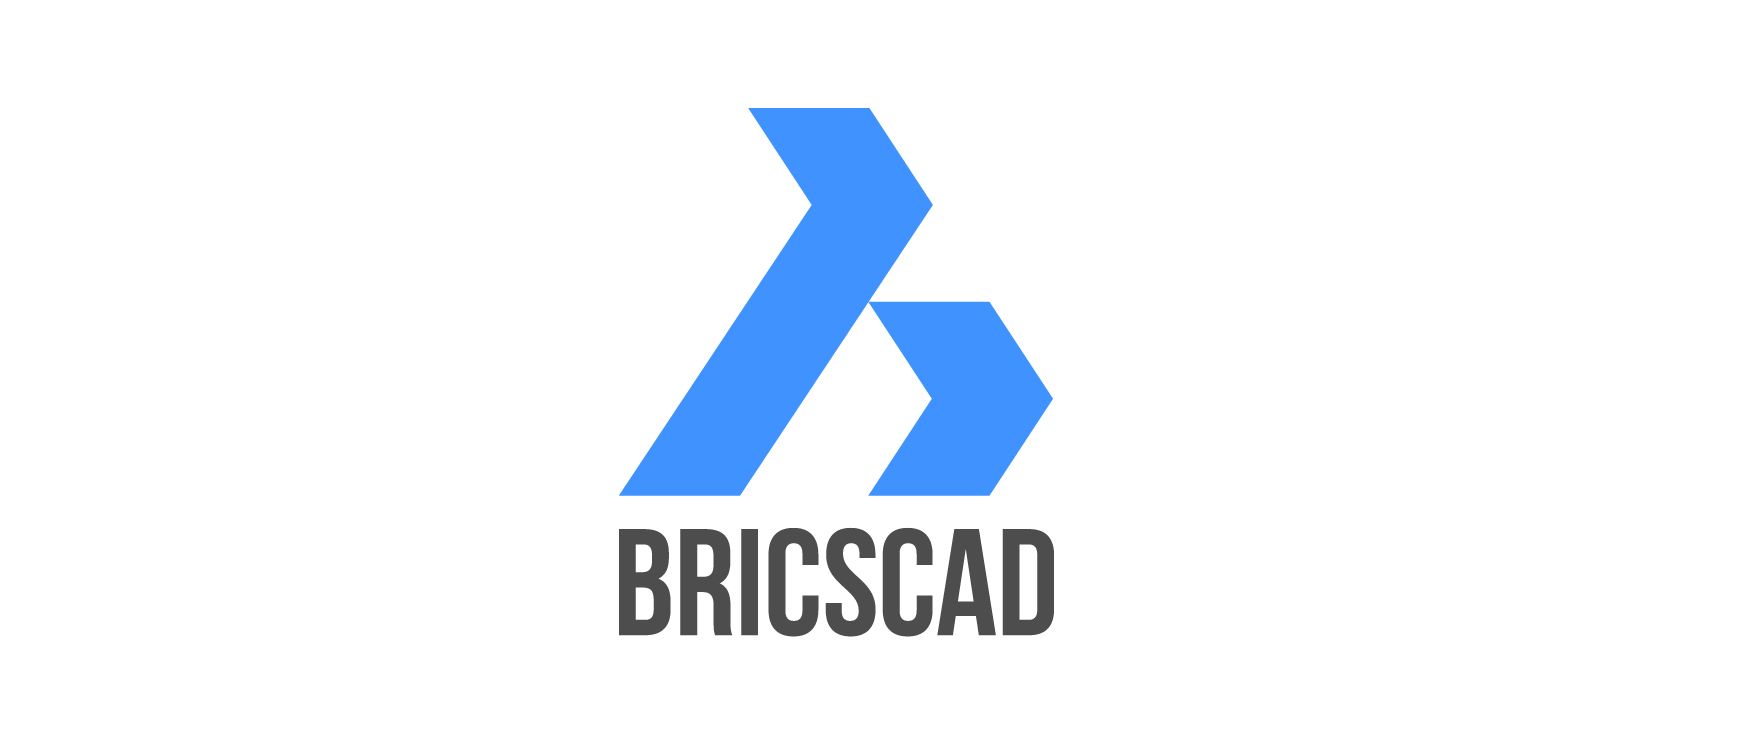 How Designairspace Supports Your Remote Working With BricsCAD